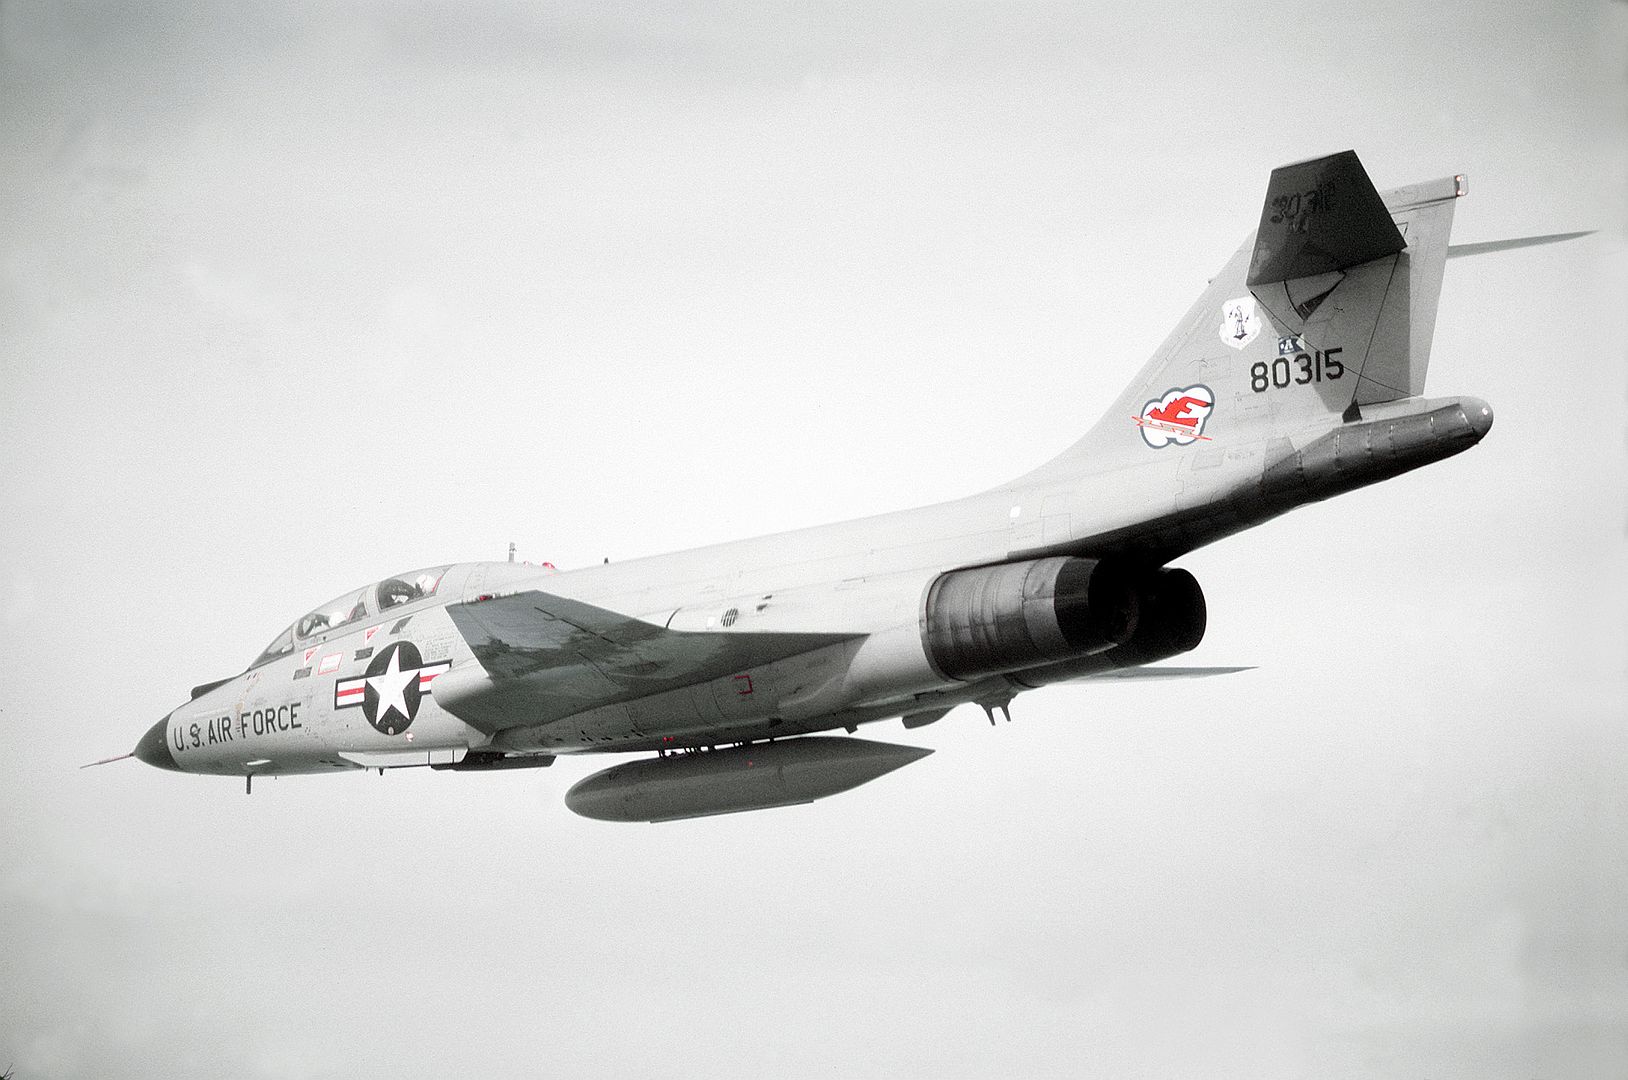  The Aircraft Is Assigned To The 107th Fighter Interceptor Group New York Air National Guard North American Air Defense Command